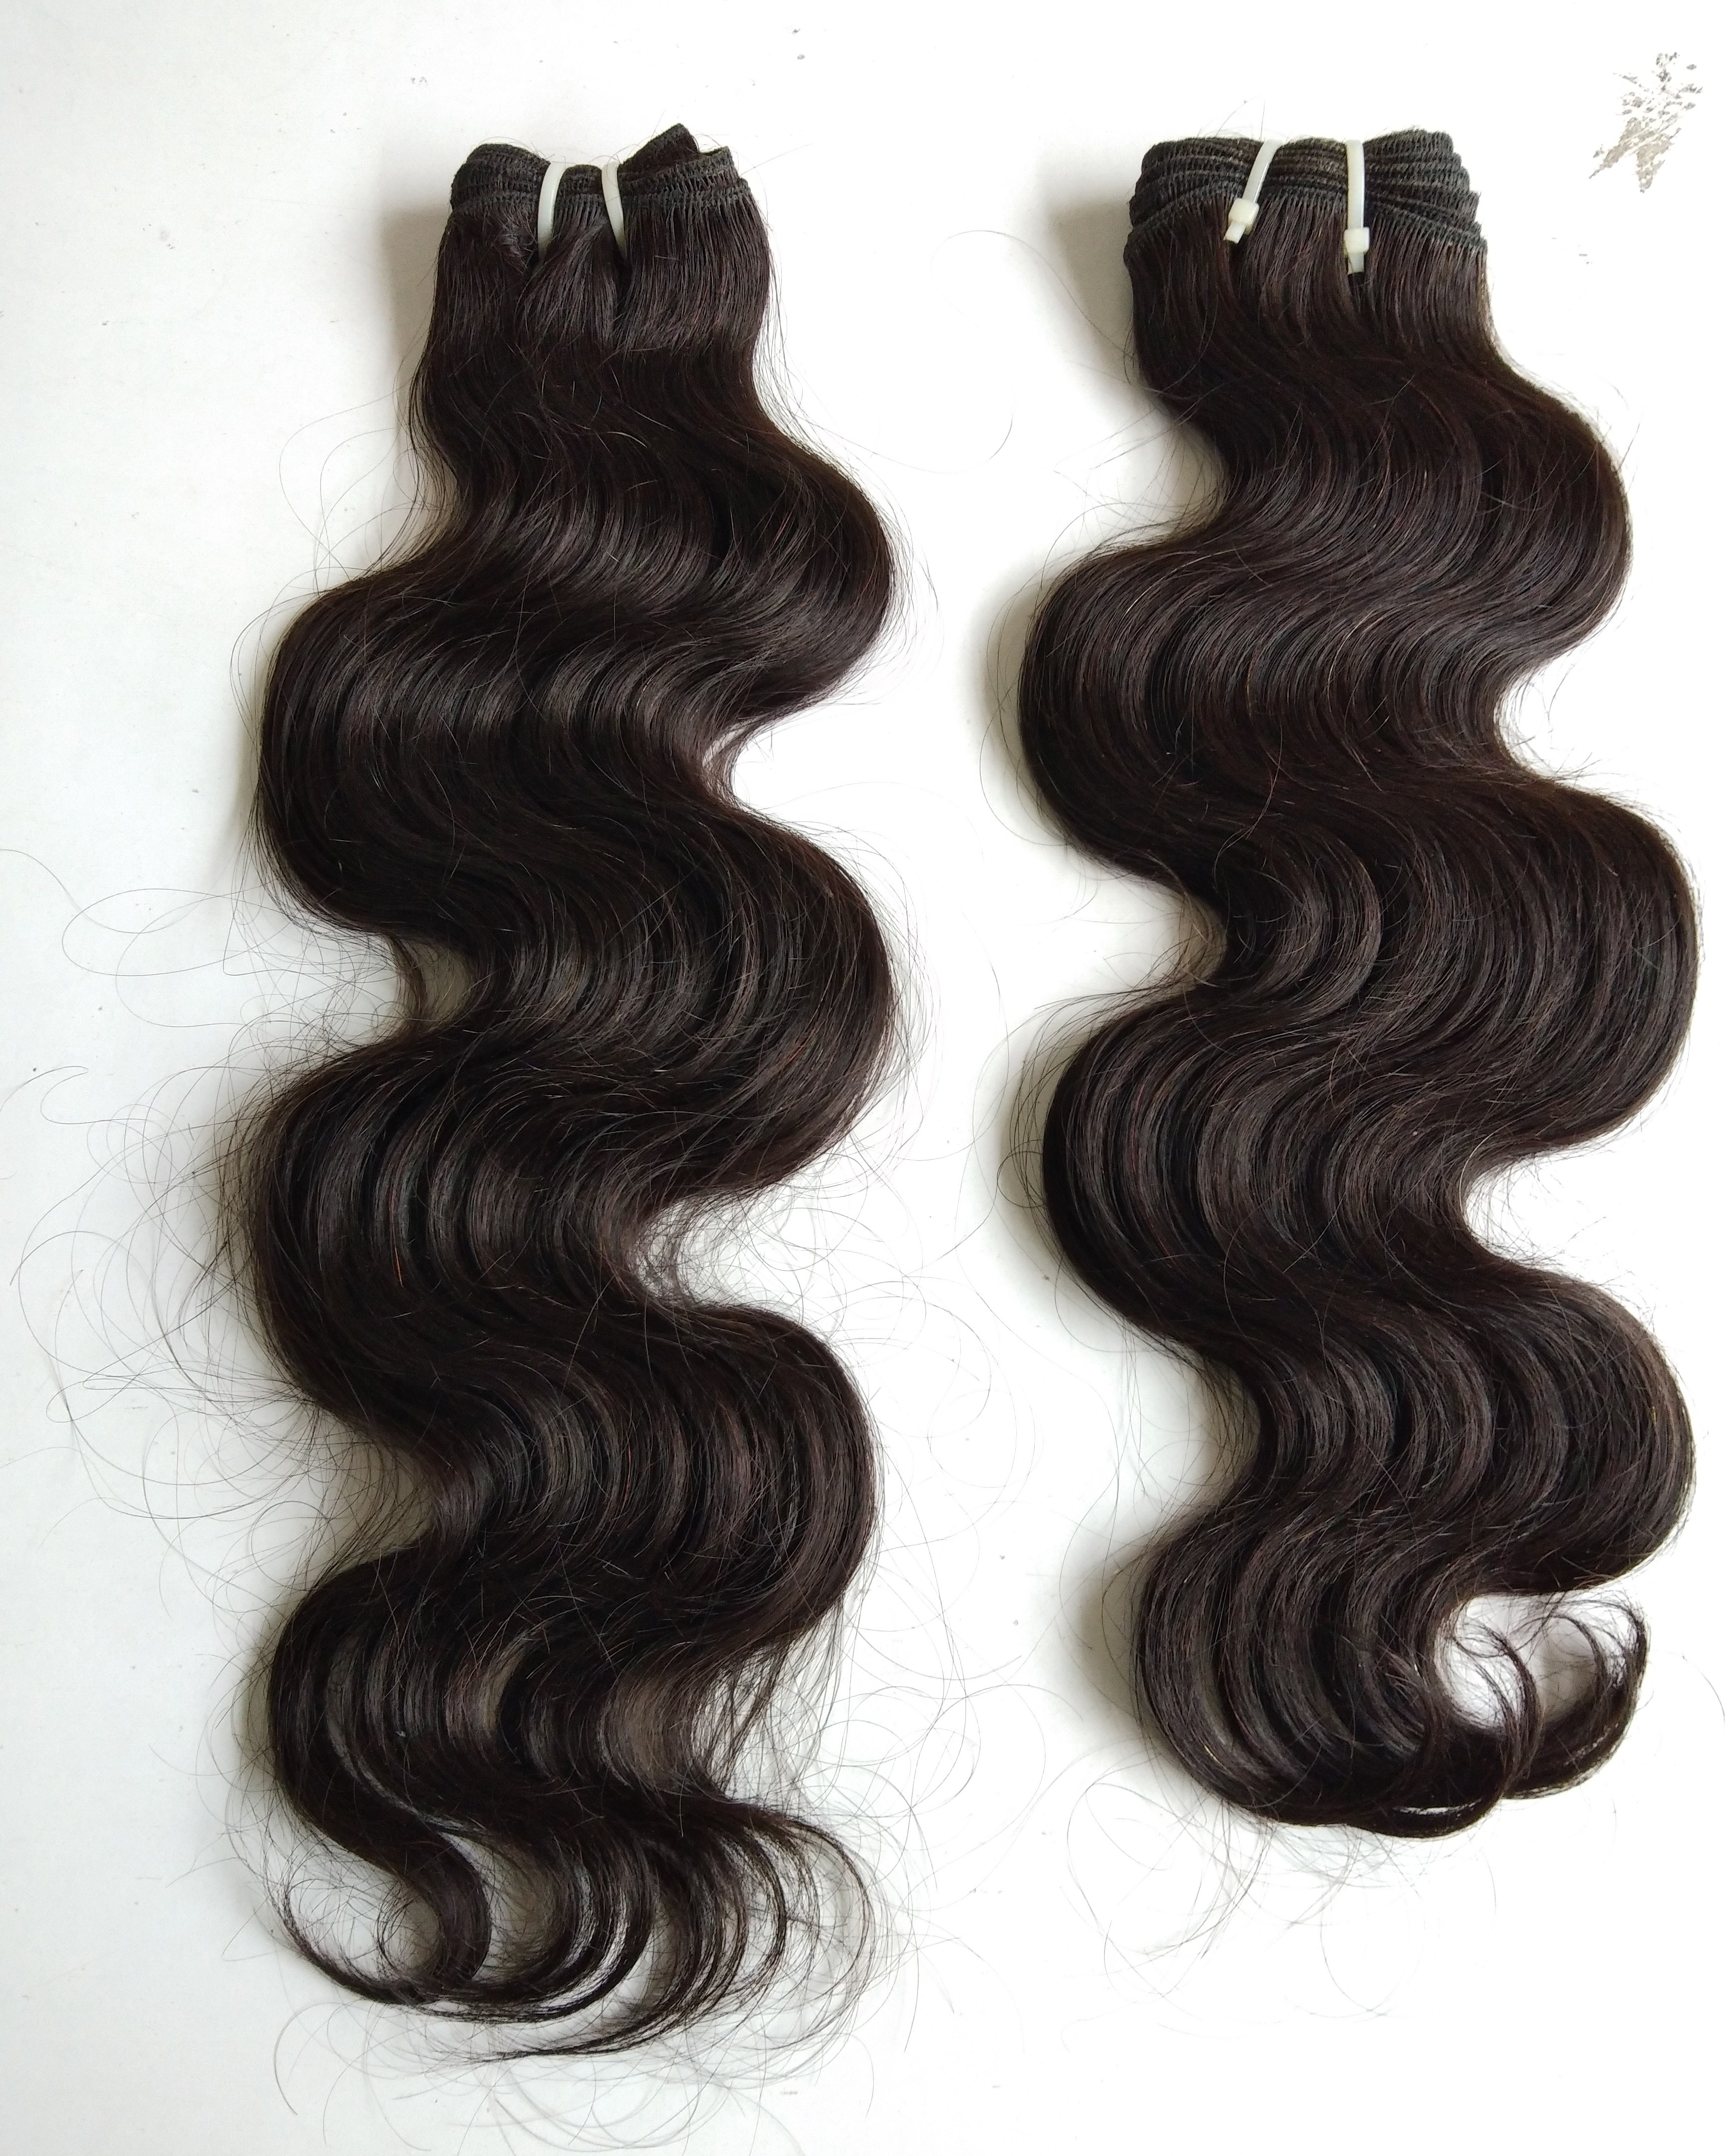 Body Wave Indian Human Hair Extensions